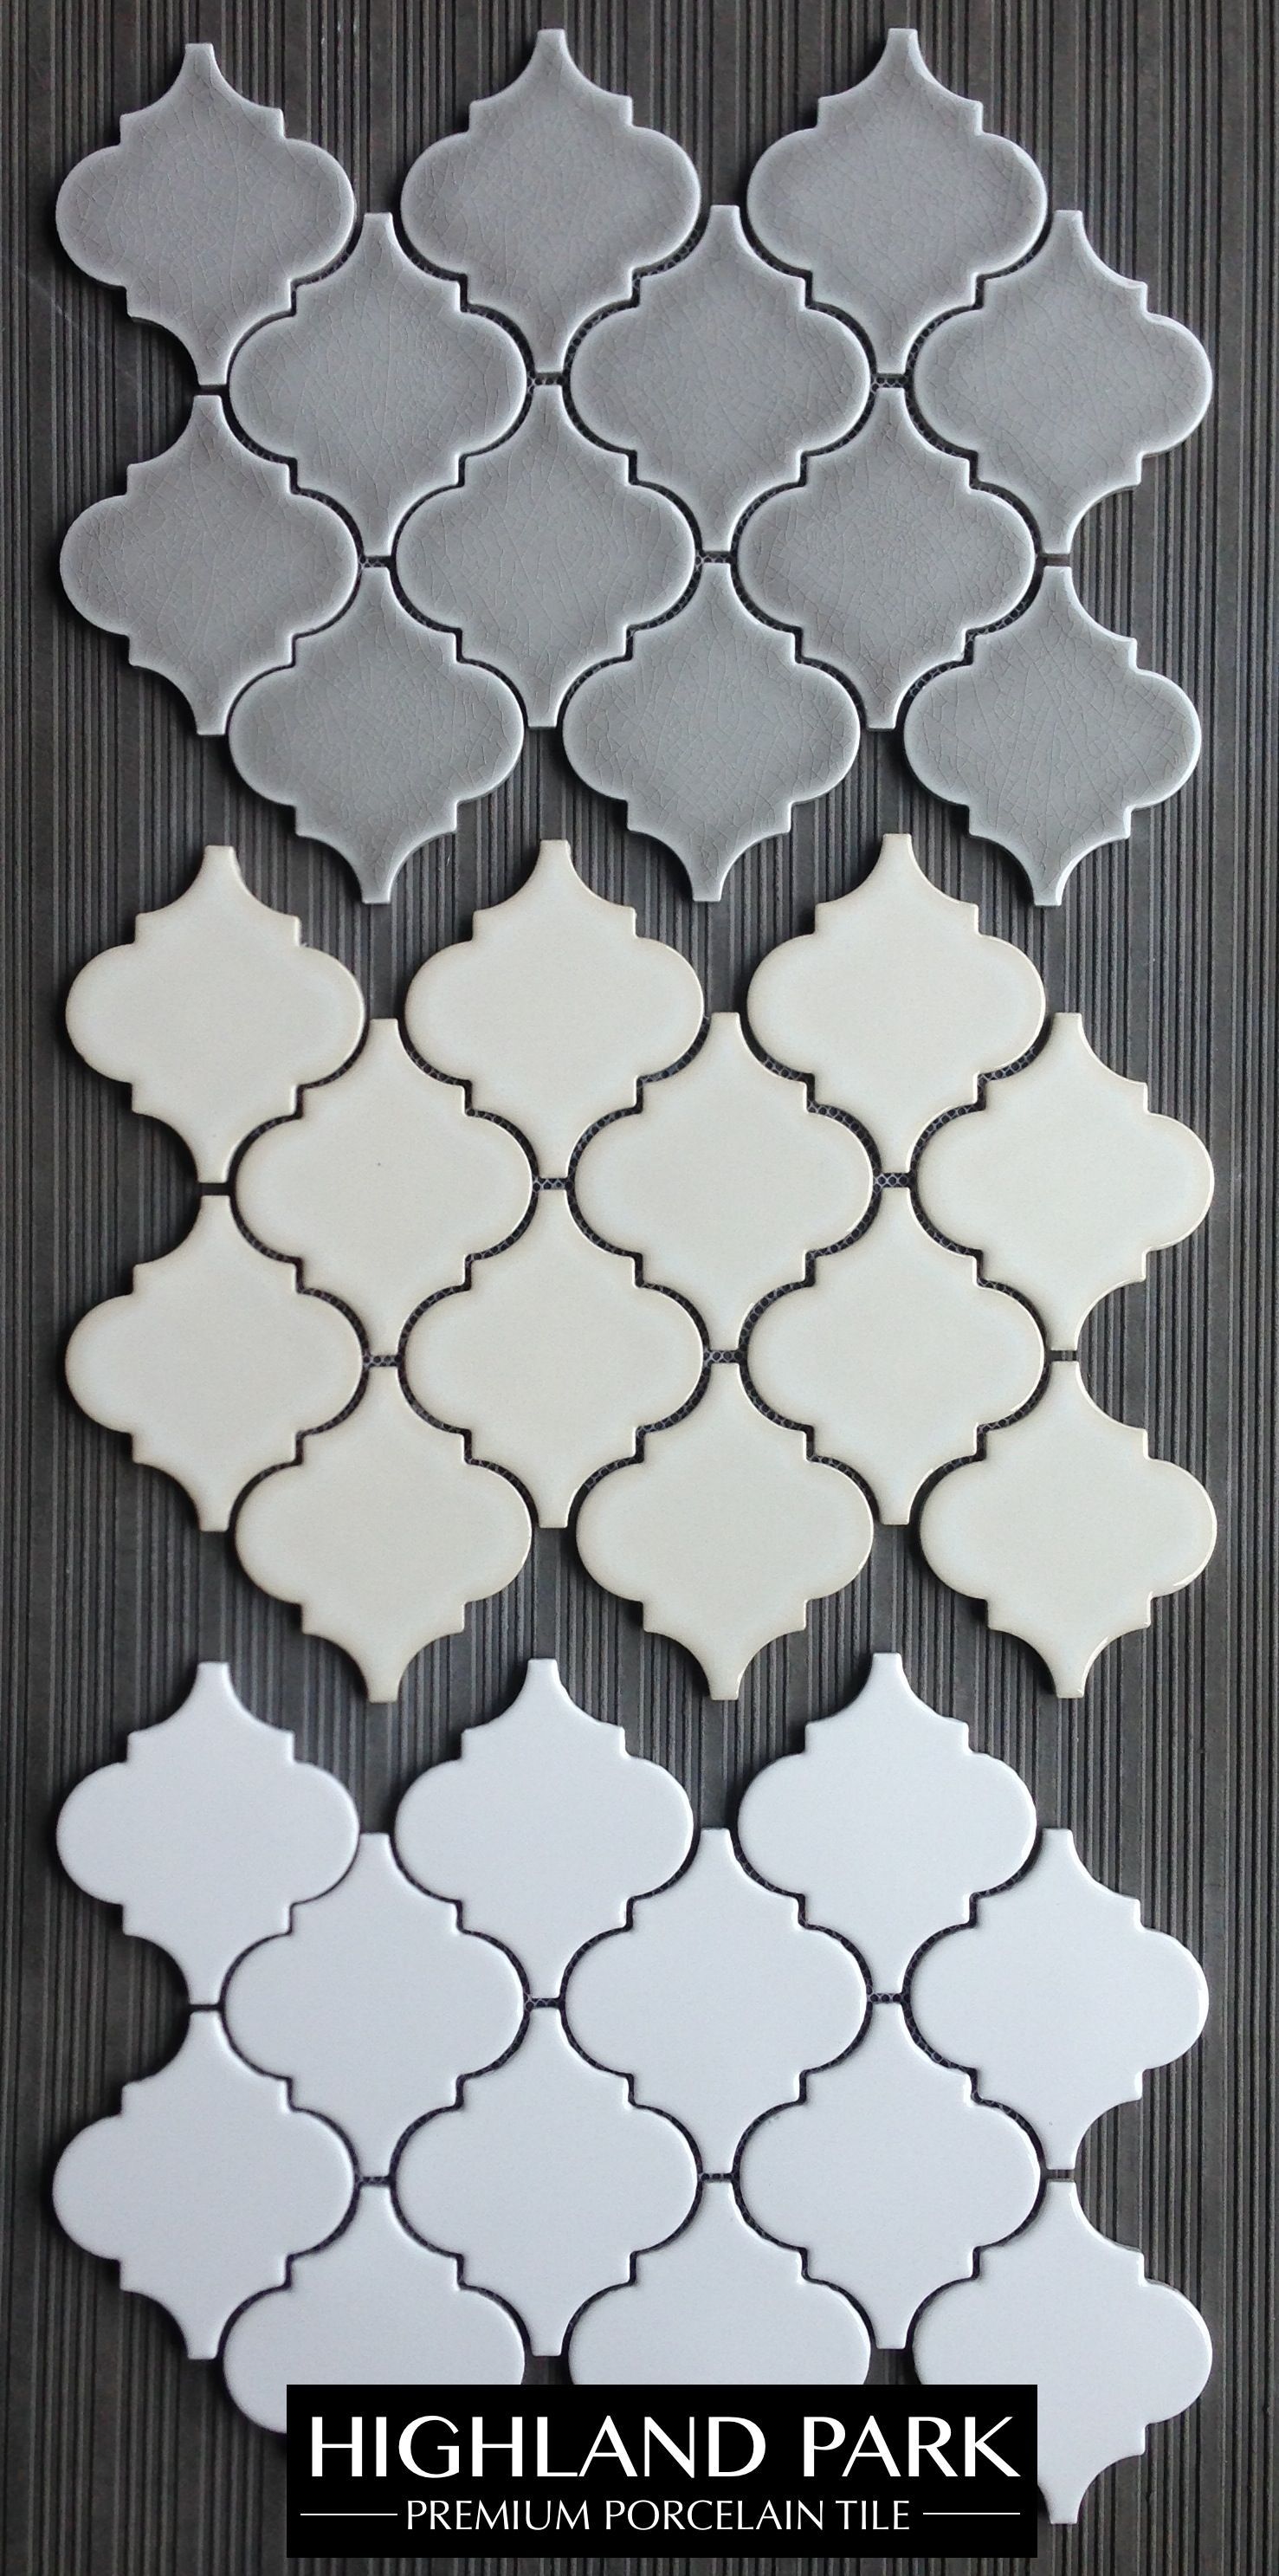 Highland Park Arabesque Porcelain Mosaic Tile for $11.50 a square foot is a great choice for a kitchen